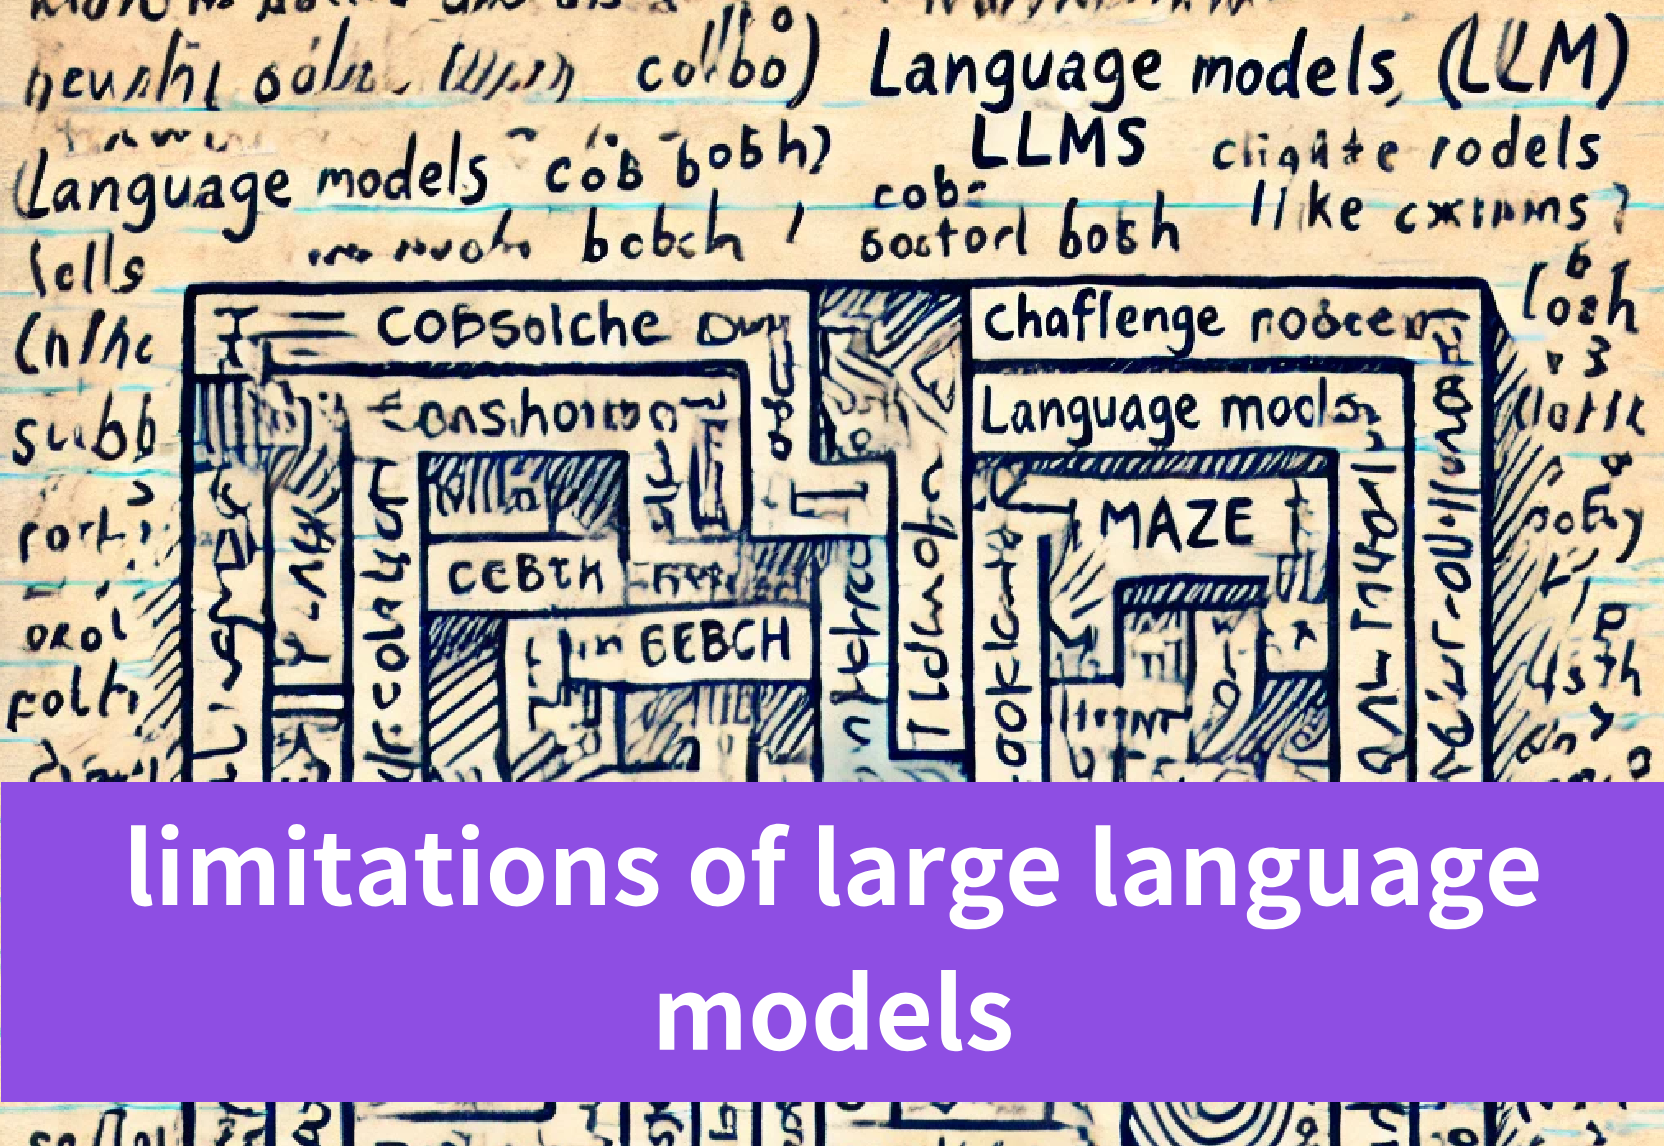 All You Need to Know about the Limitations of Large Language Models